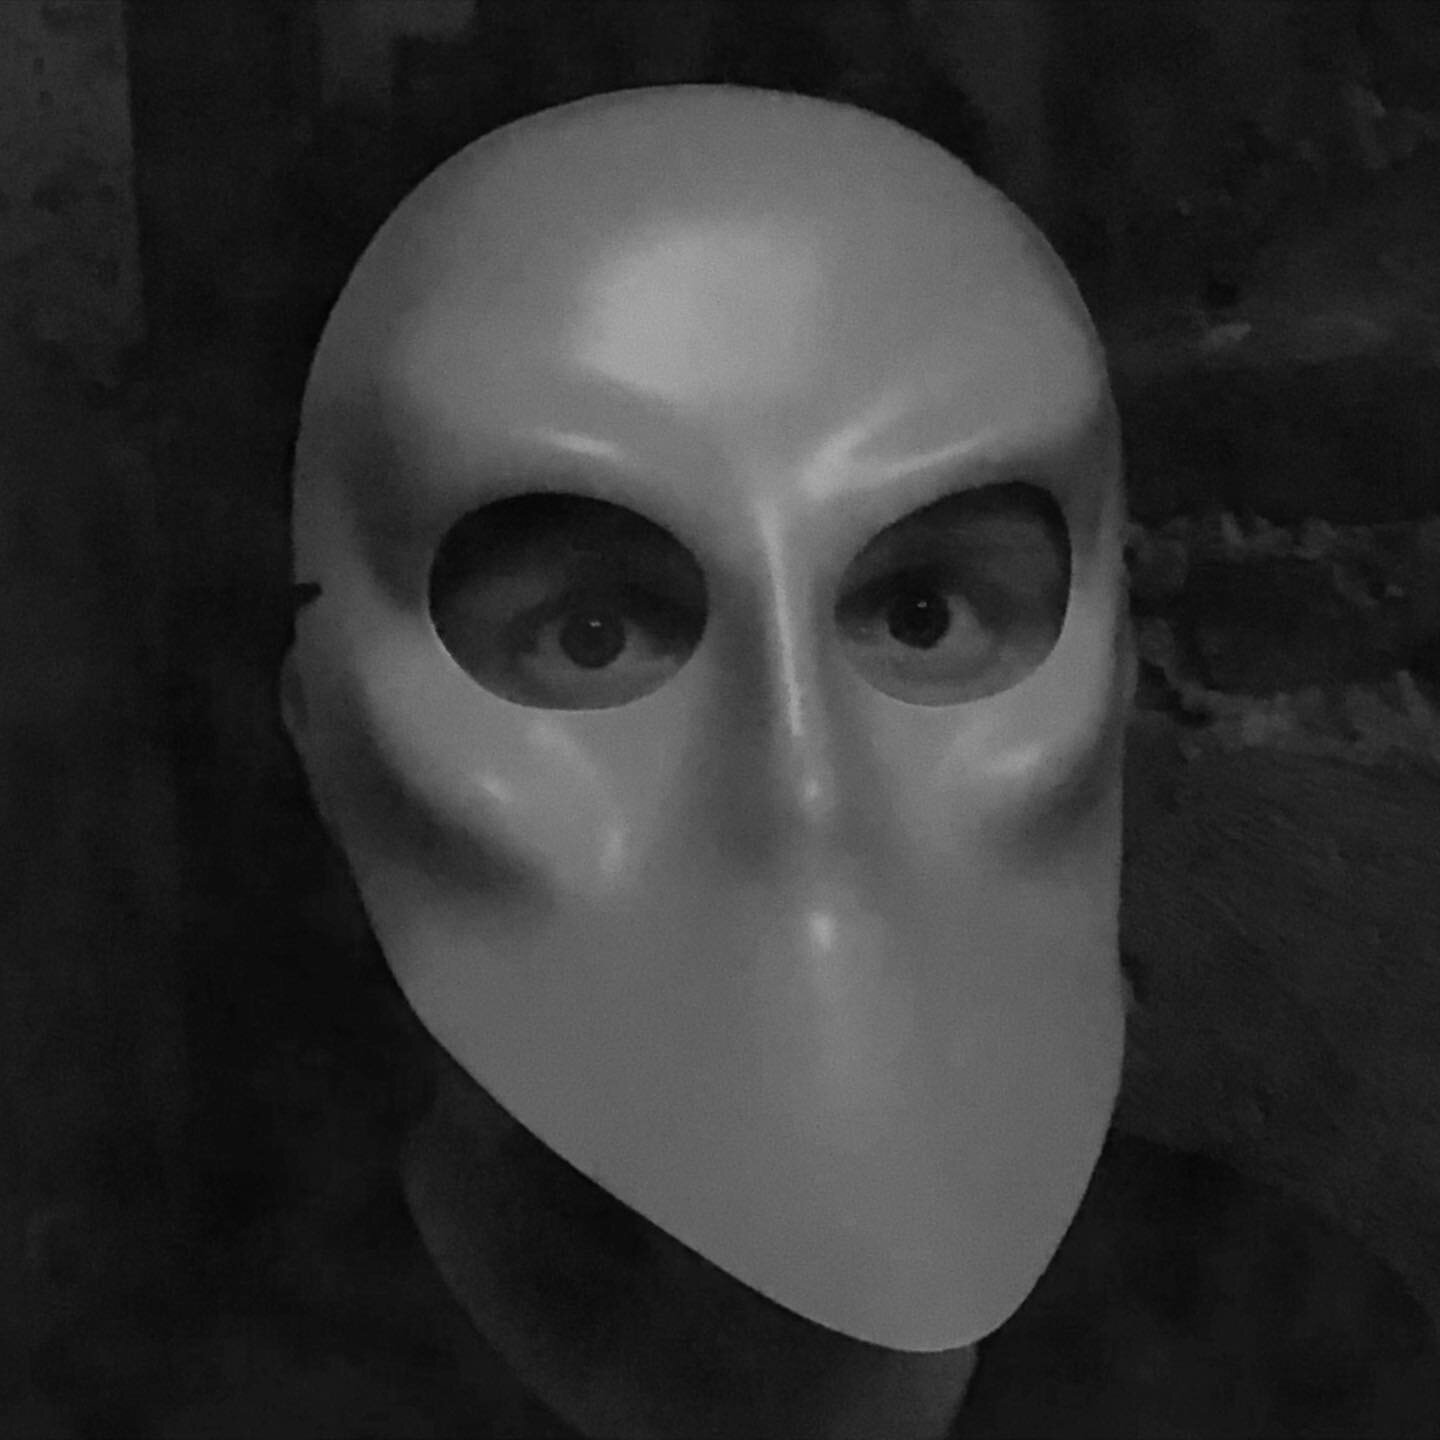 &ldquo;Give him a mask and he will tell you the truth.&rdquo; -Oscar Wilde